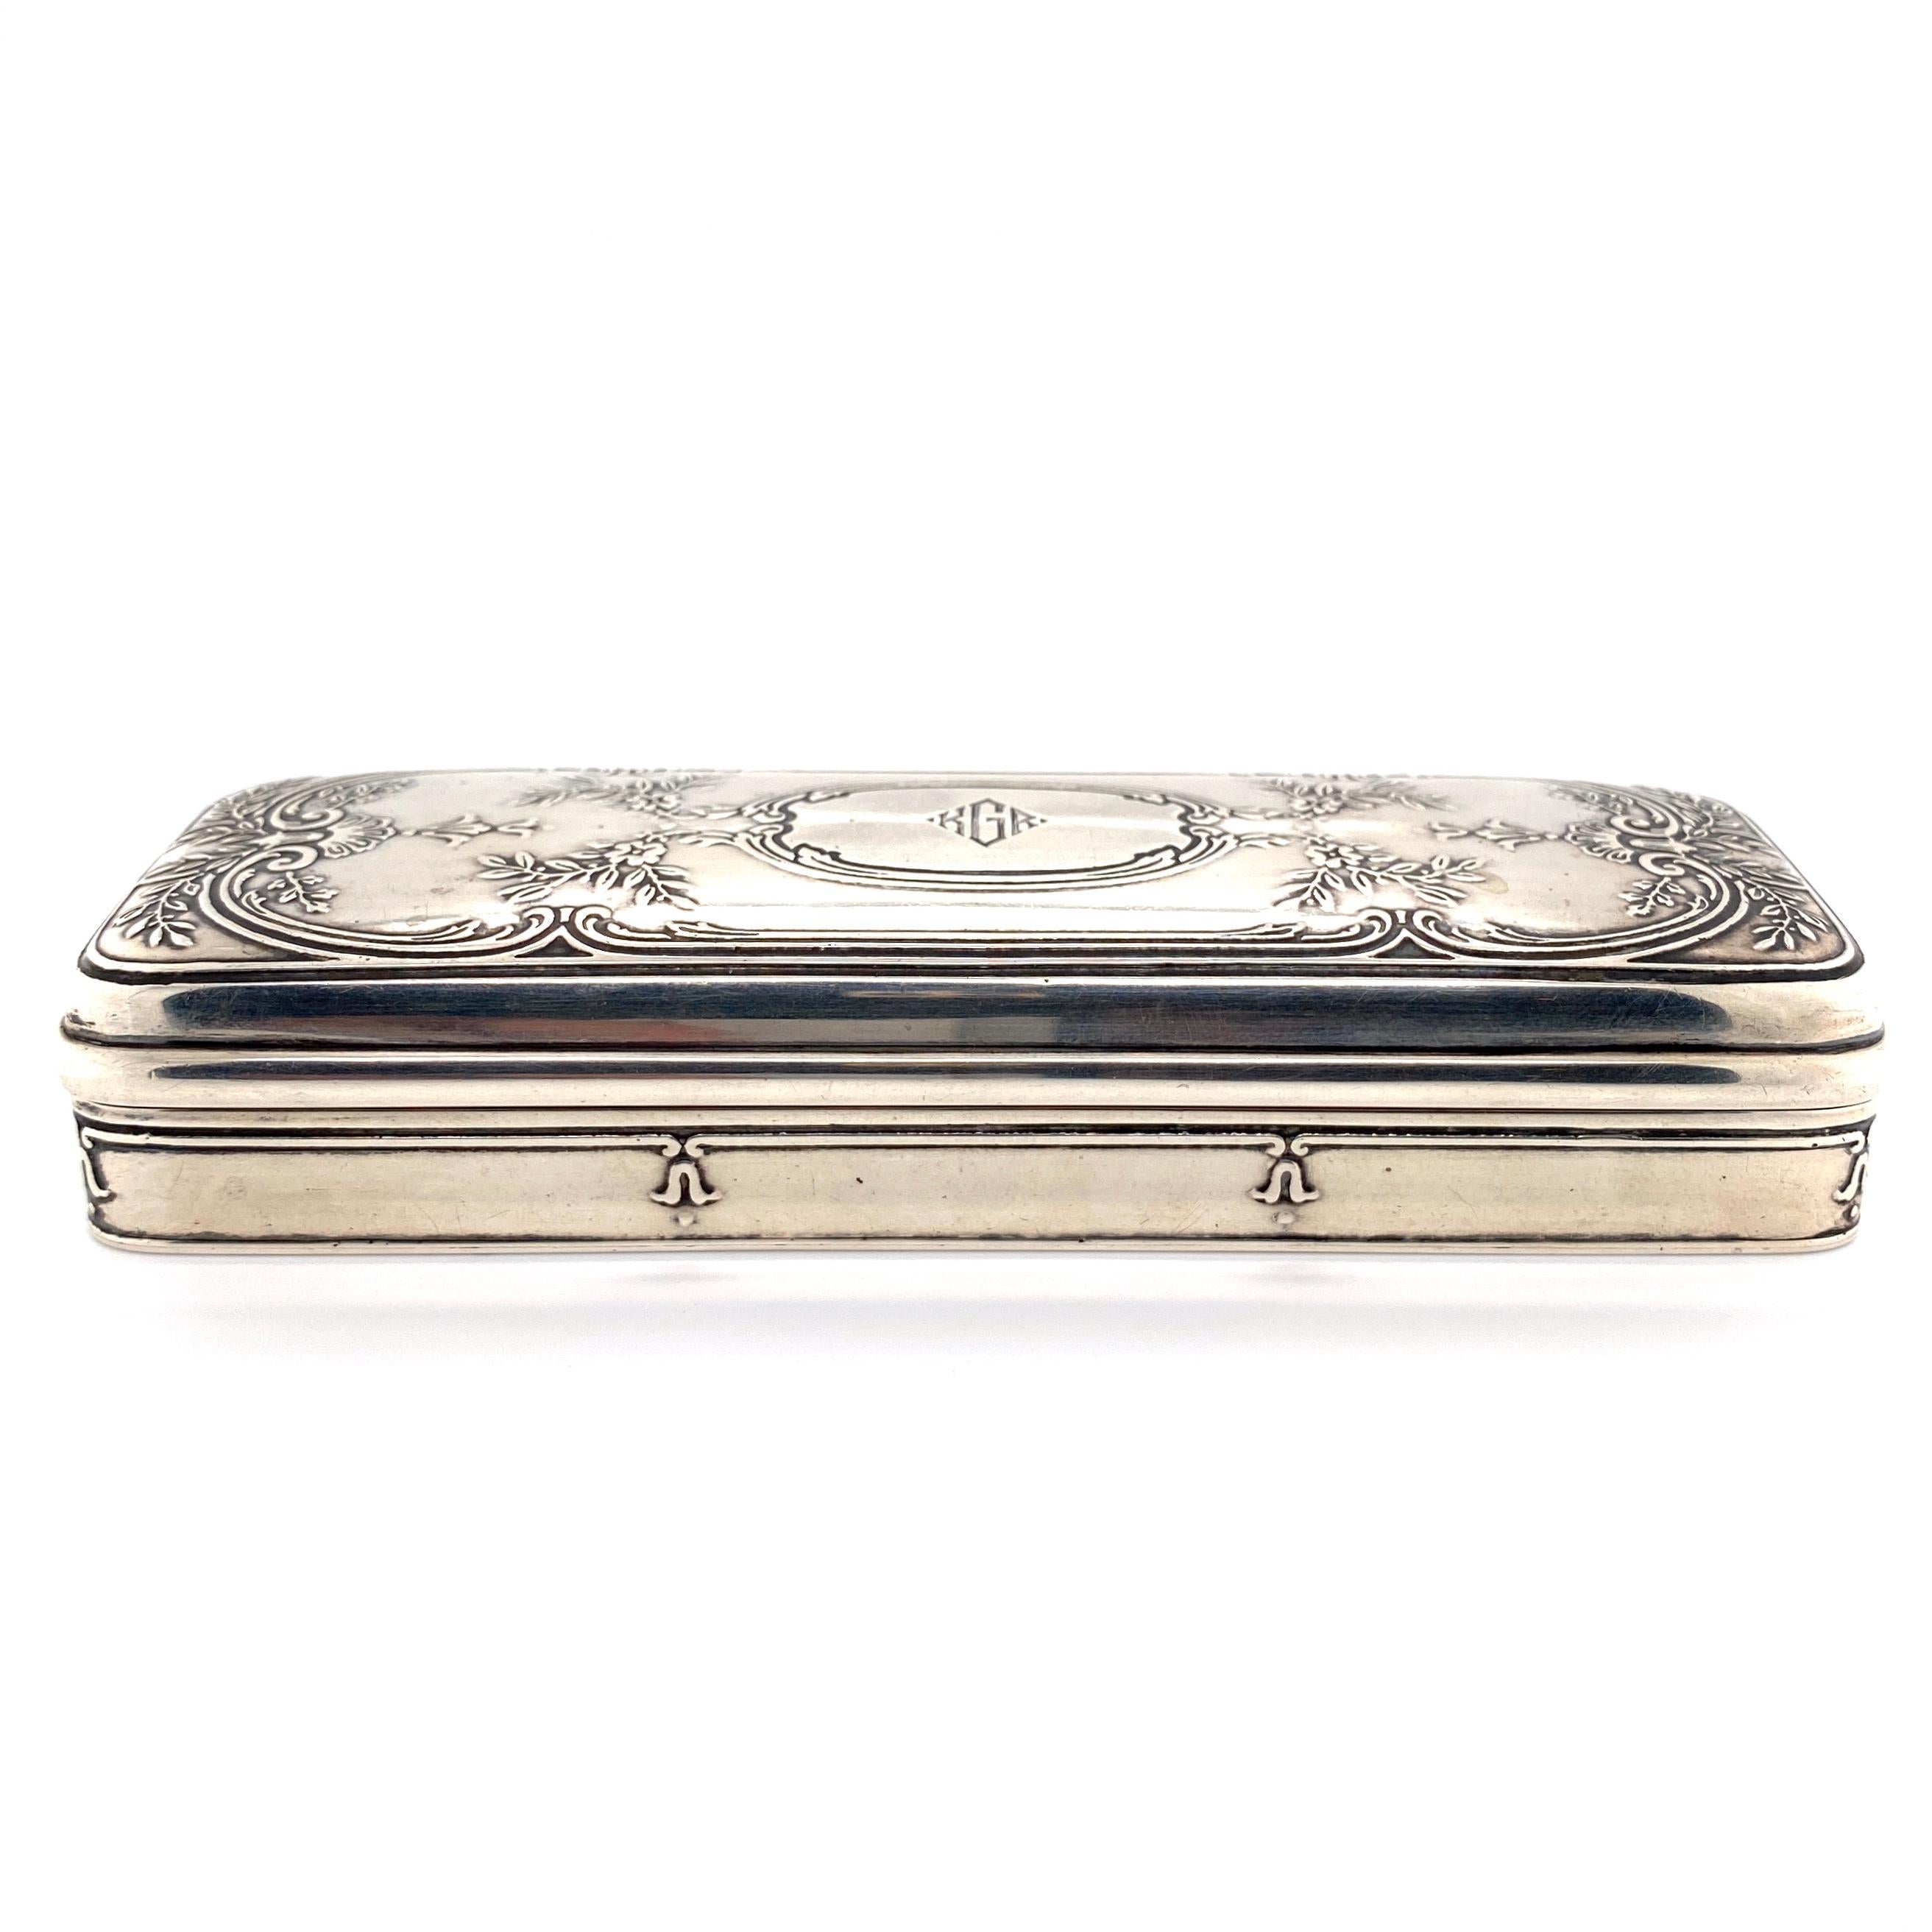 Iconic Tiffany & Co. sterling silver 925 box. Beautifully hand engraved design and detailing on top and sides and center with initialed monogram: KGR. Approx. dimensions: 5.50” l x 1.78” w x 1.03” h. Circa: 1900. Base stamped: TIFFANY & CO 7969 L